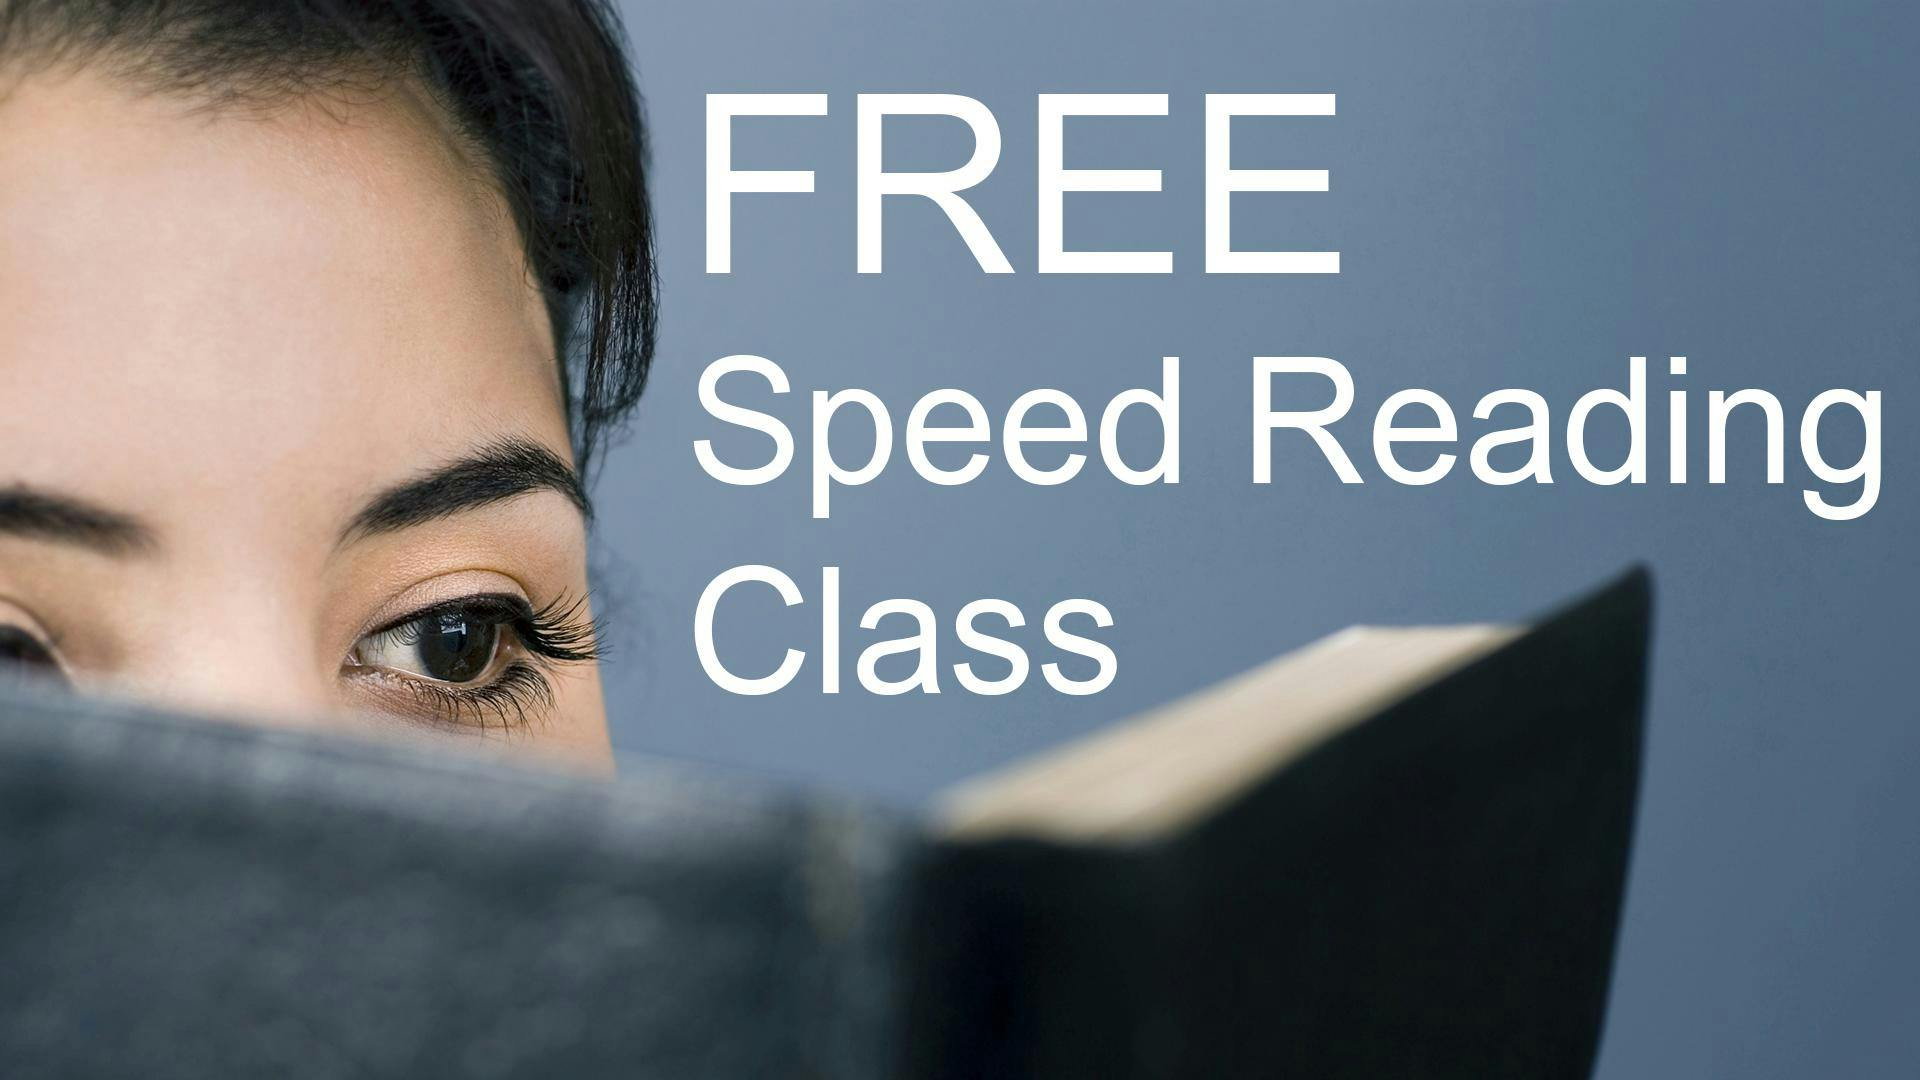 Free Speed Reading Class - Anchorage